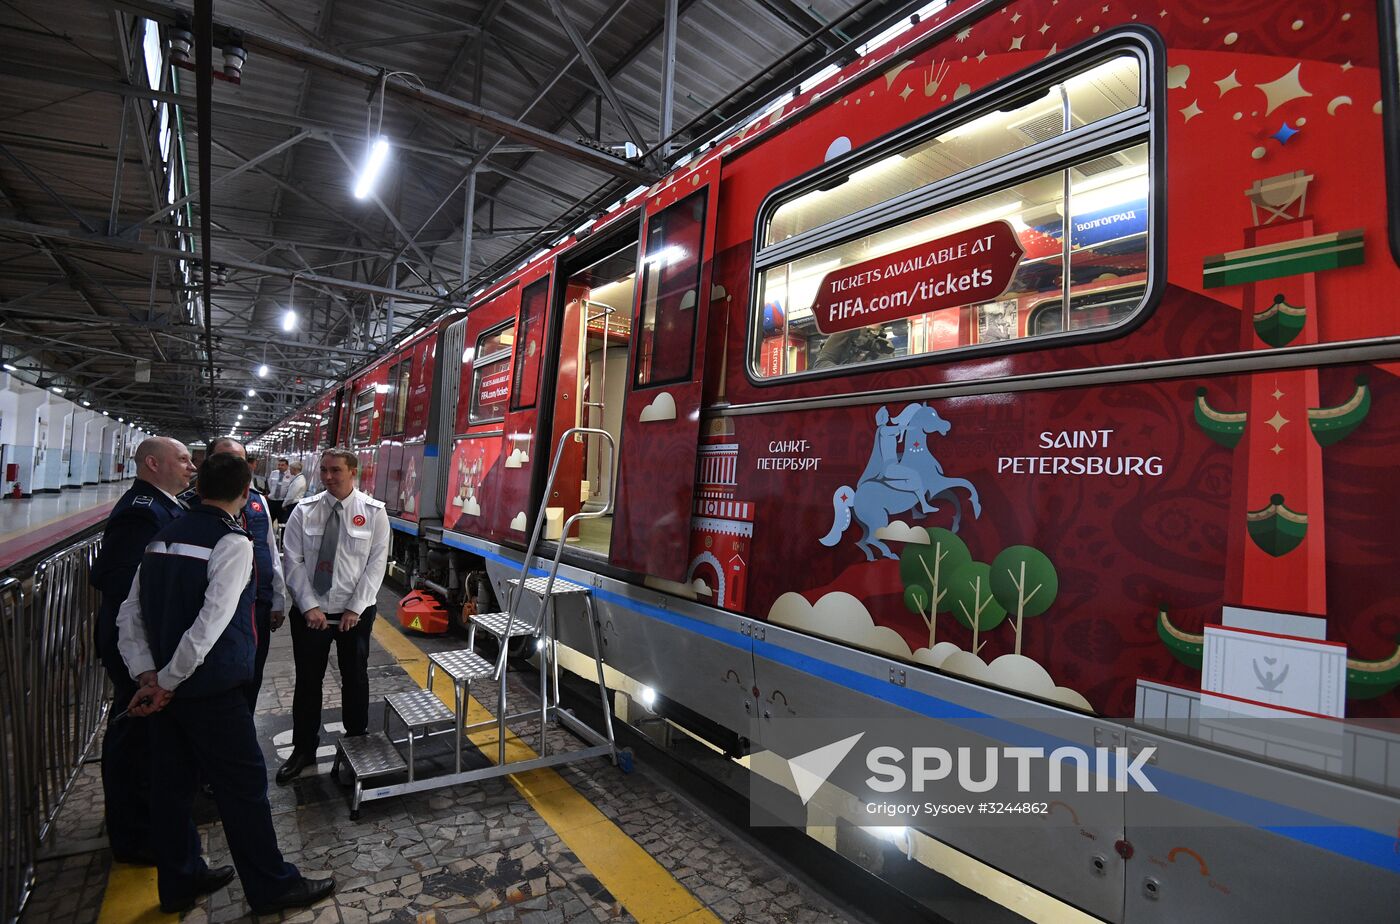 Presentation of 2018 FIFA World Cup official train